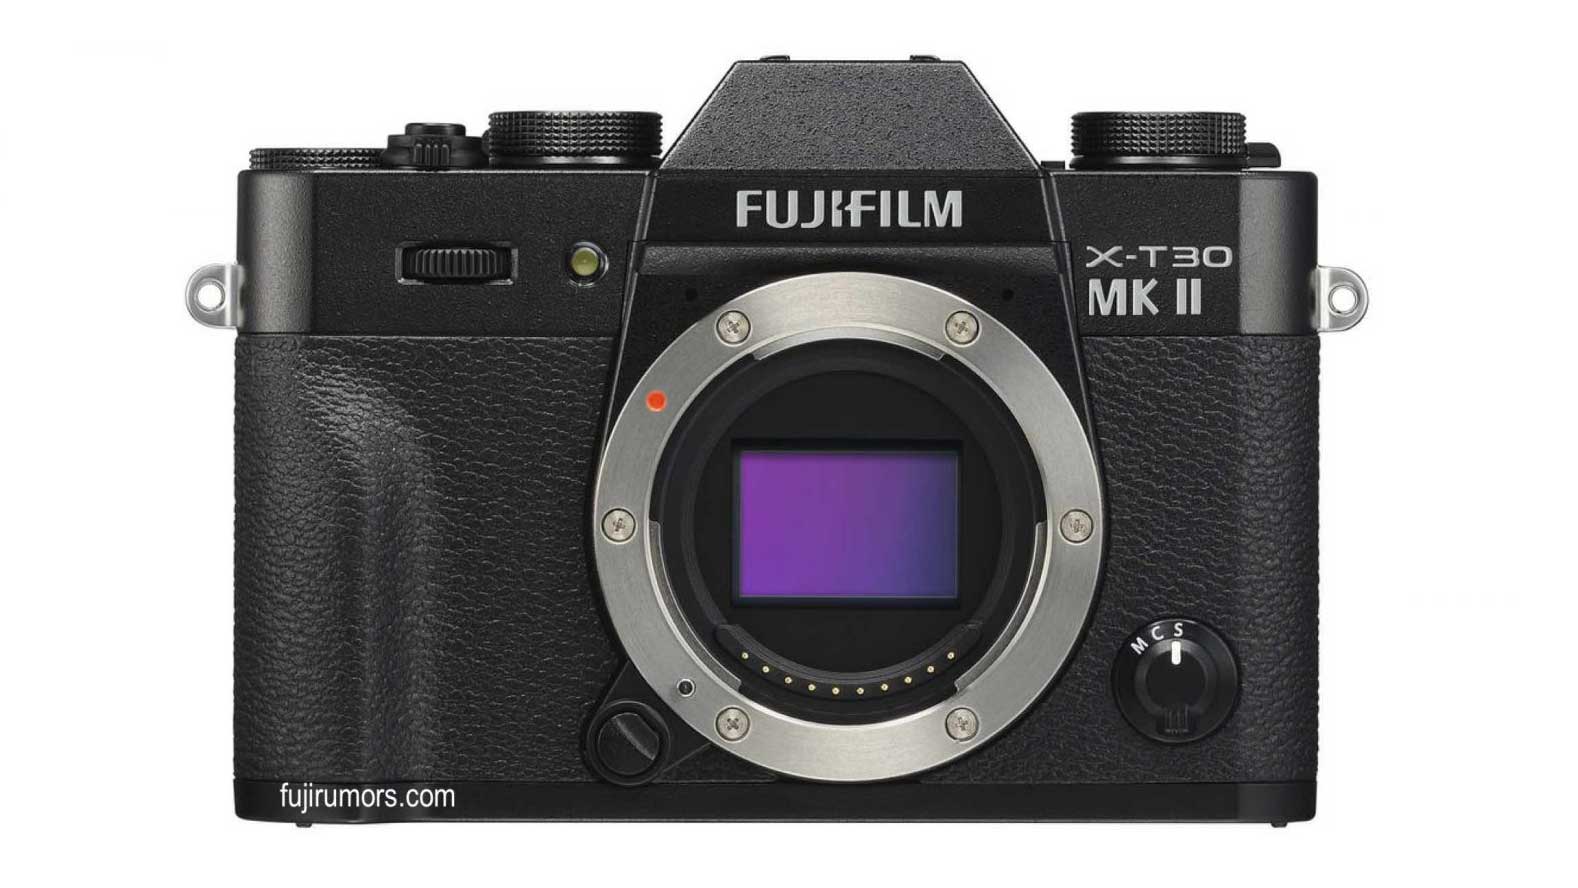 Fujifilm X-T30 Mark II rumored to appear – but still no mention of an 